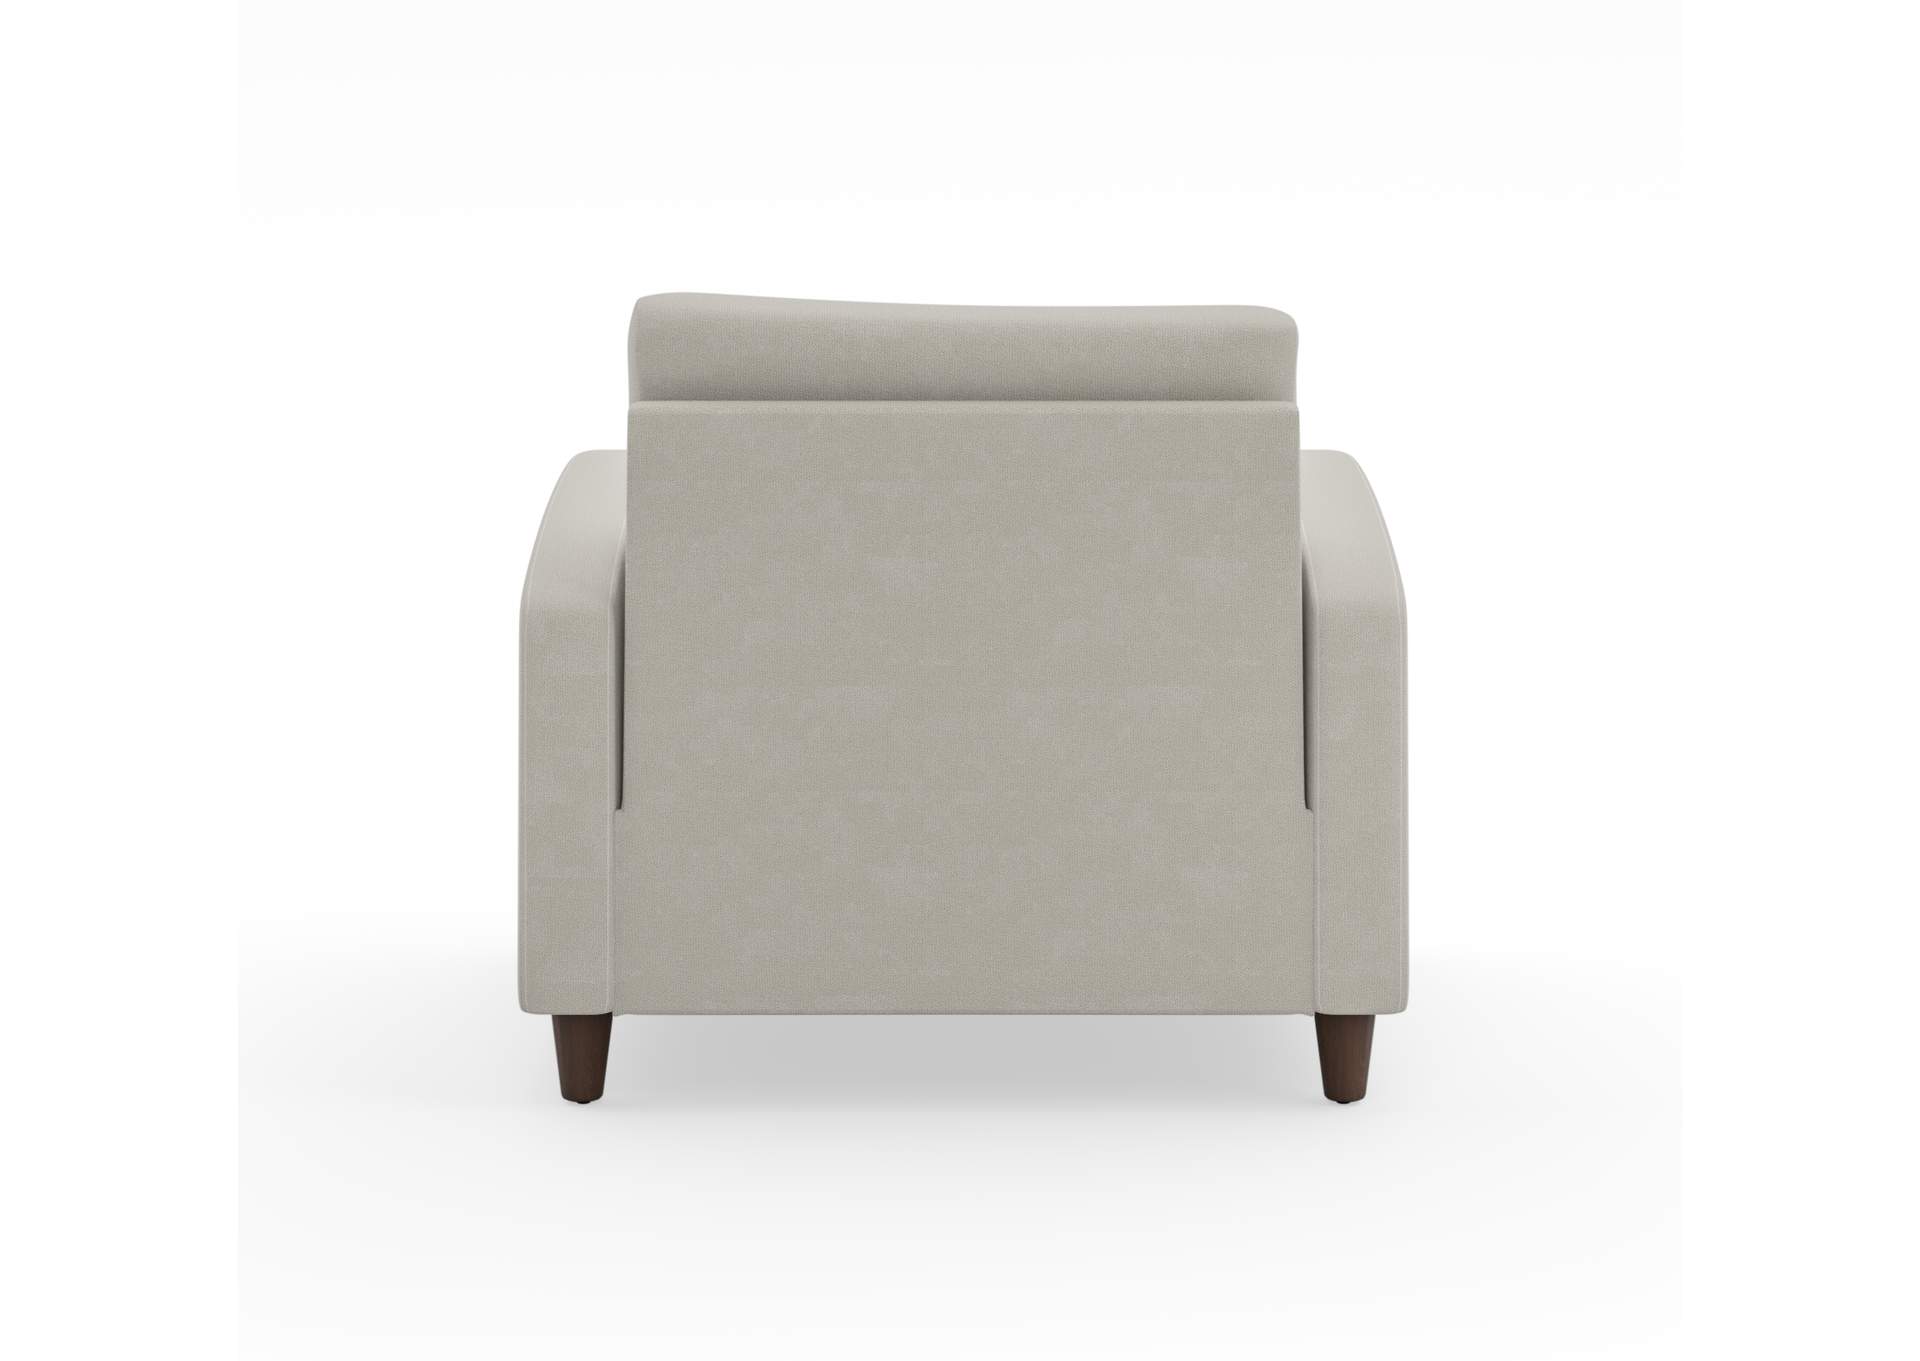 Blake Armchair By Homestyles,Homestyles